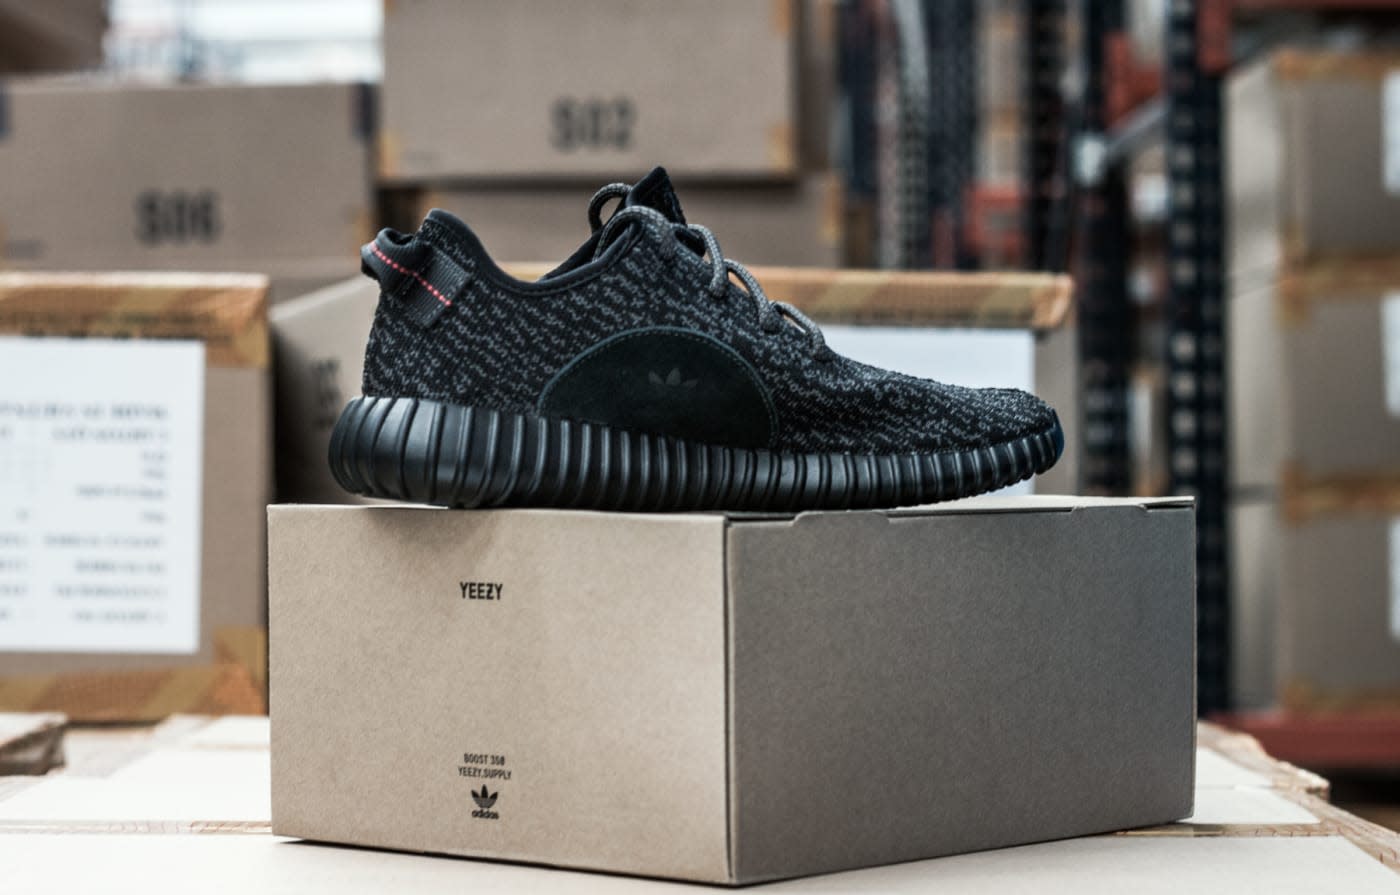 Adidas tries to make buying Yeezys but misses the mark | Engadget